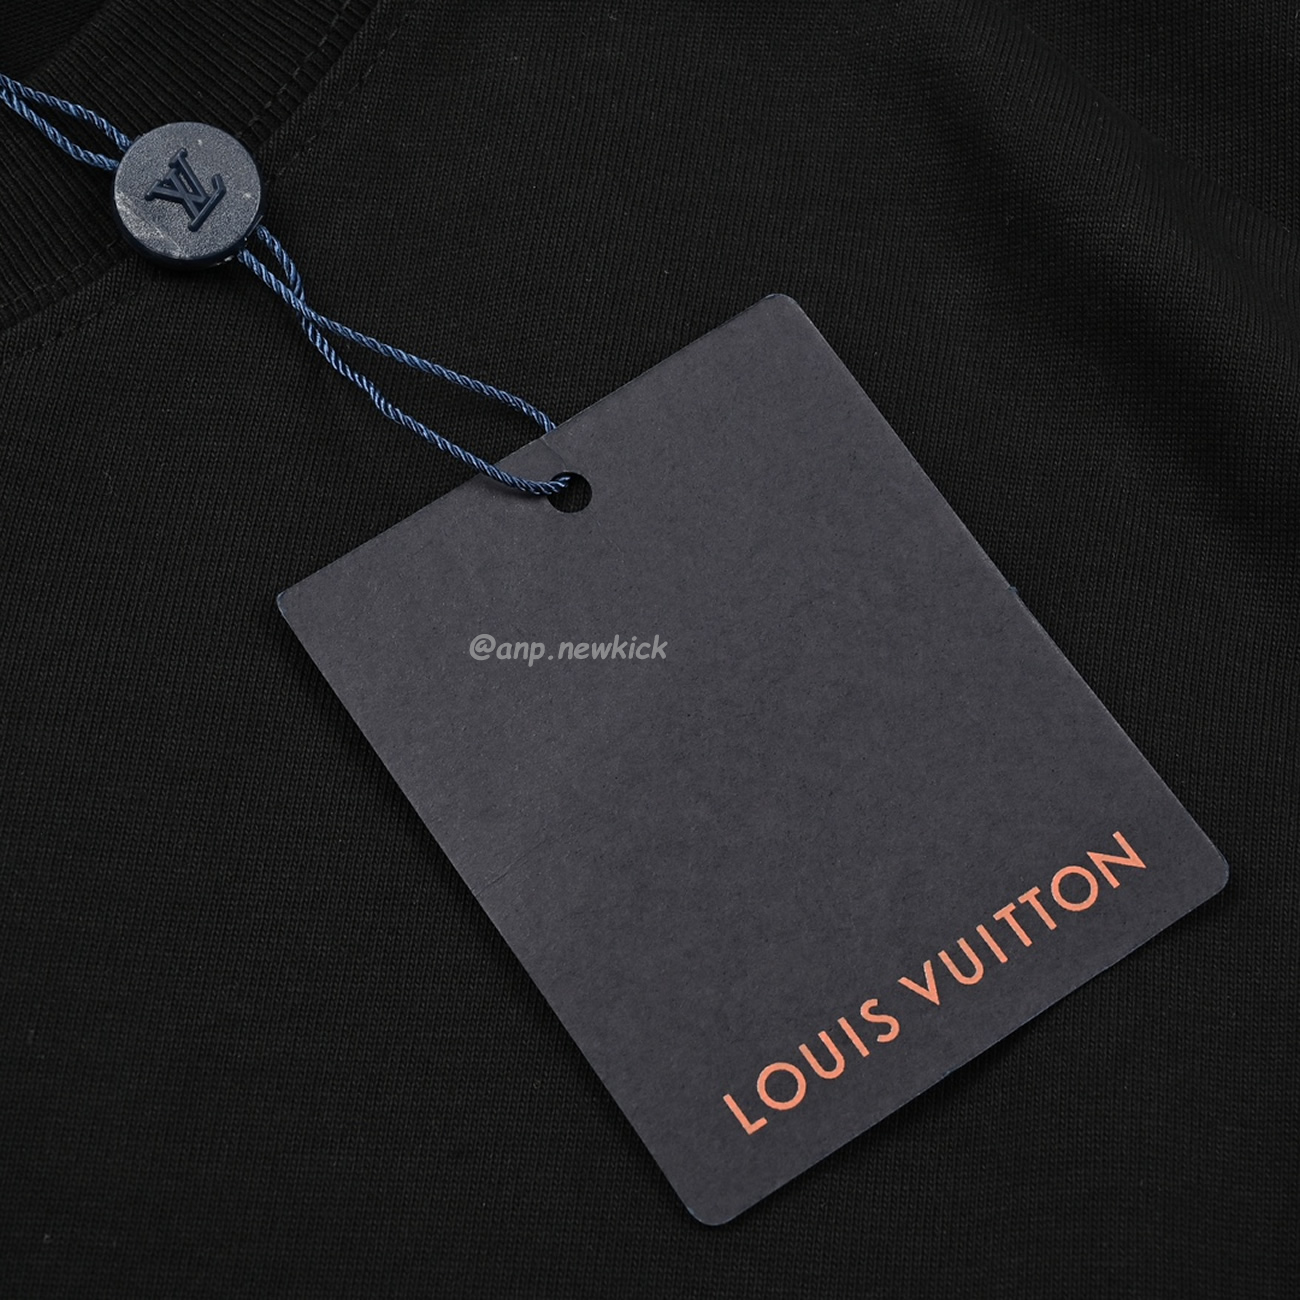 Louis Vuitton 24ss Embroidered Letter Printed Short Sleeves T Shirt (8) - newkick.org